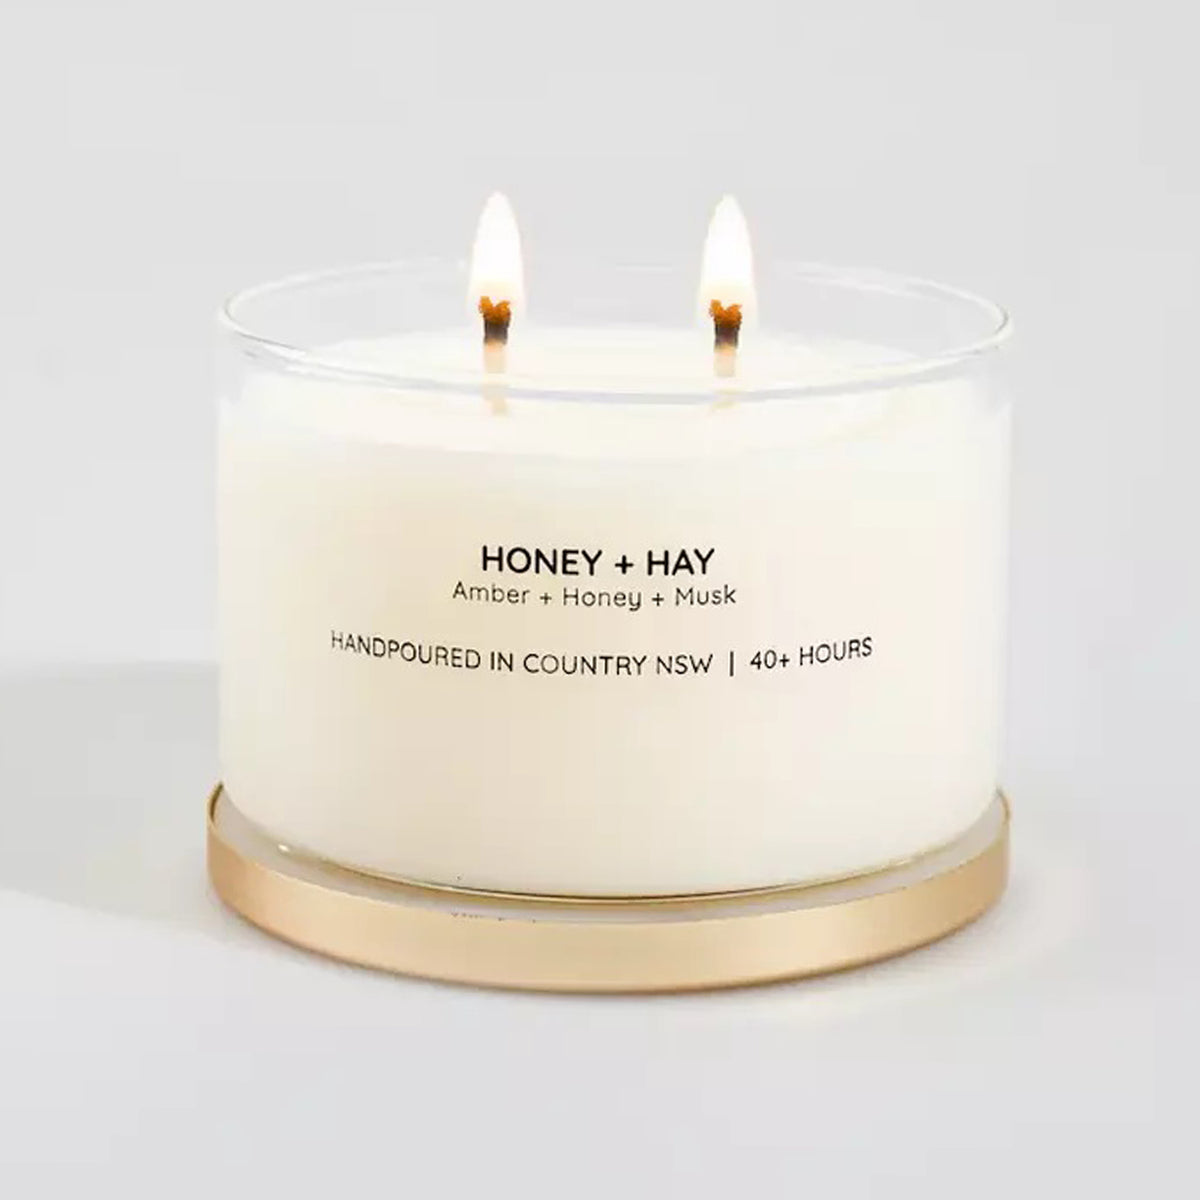 100% Natural Soy Wax "Honey & Hay" Candle from Australia (330g)